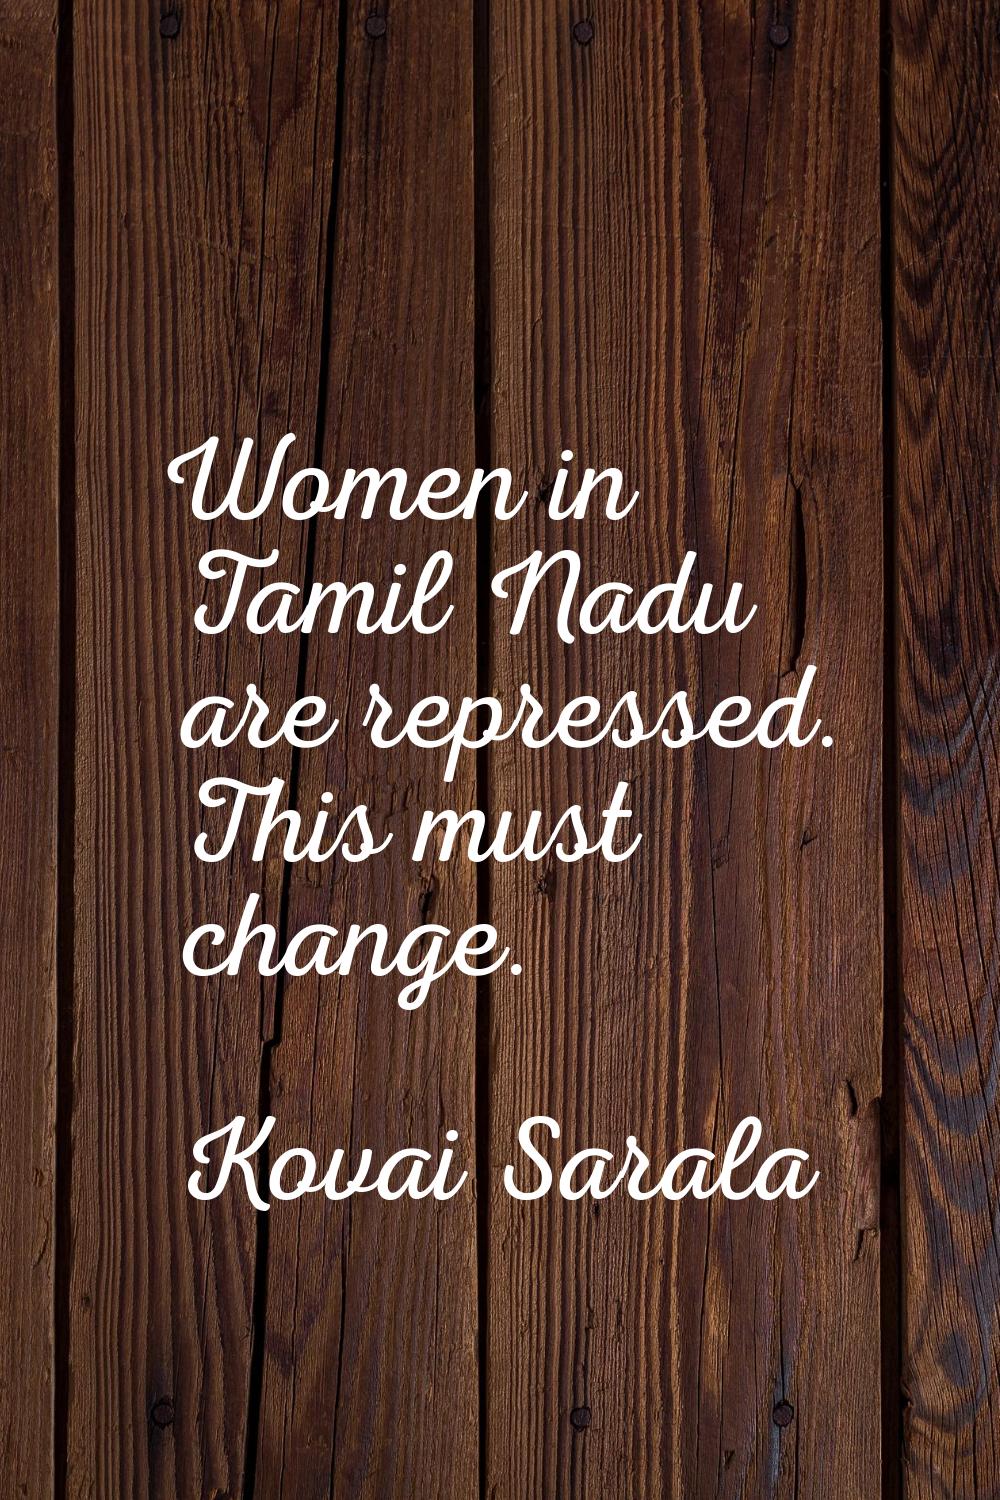 Women in Tamil Nadu are repressed. This must change.